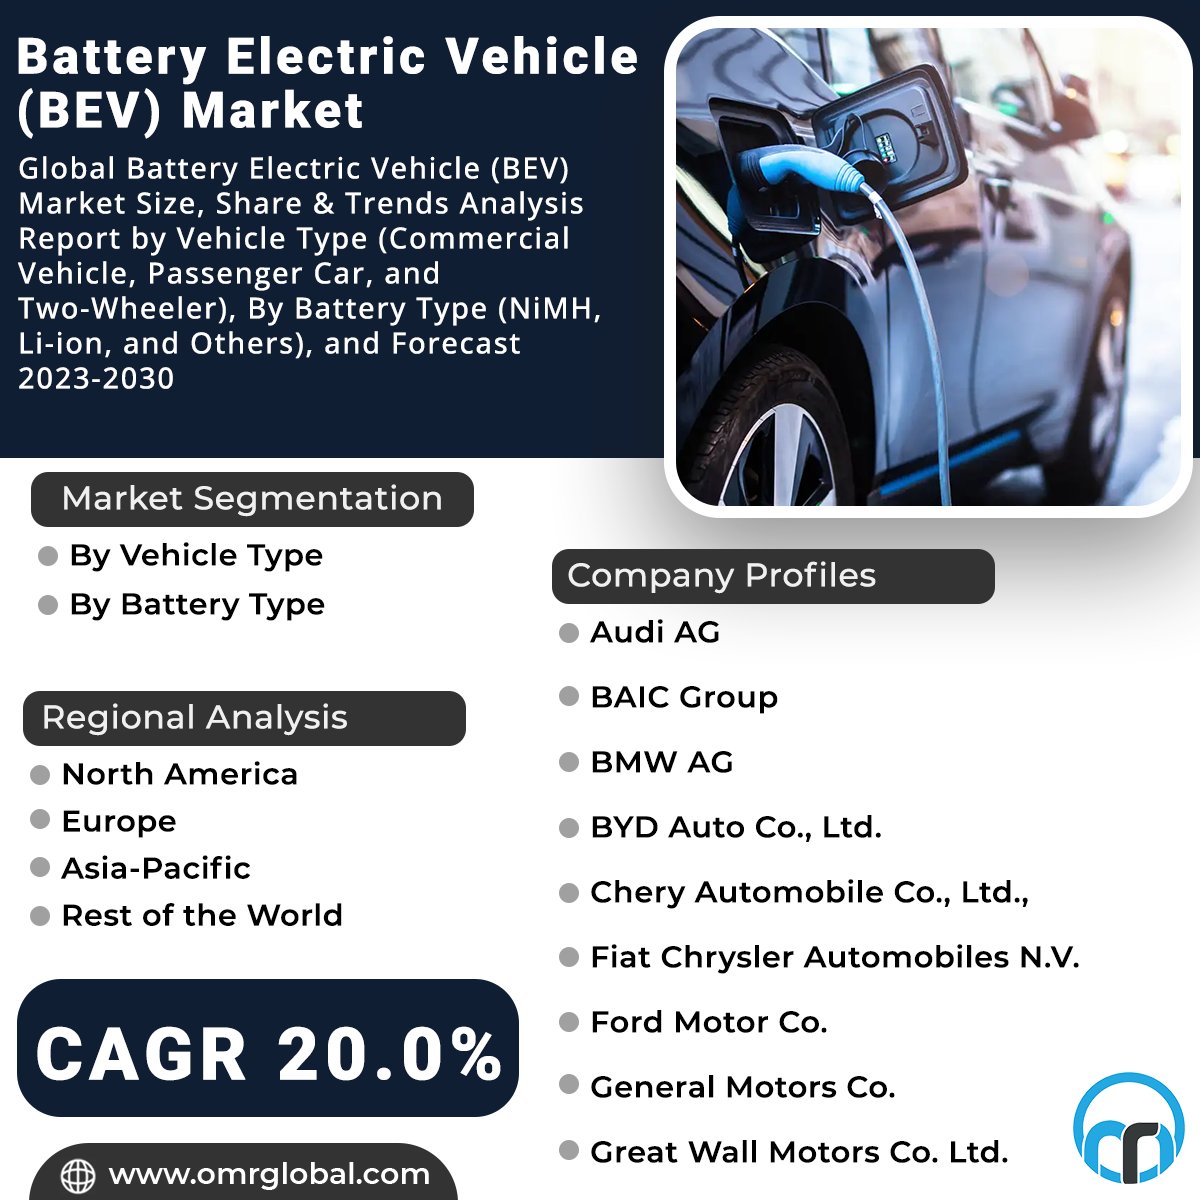 The global battery electric vehicle market is estimated to grow at a CAGR of more than 20.0% during the forecast period.

For more detais:bit.ly/3NlhXIB

#energy #passengercar #electricvehicle #batteryelectric #cars #electriccars #charginginfrastructure #fuelcell